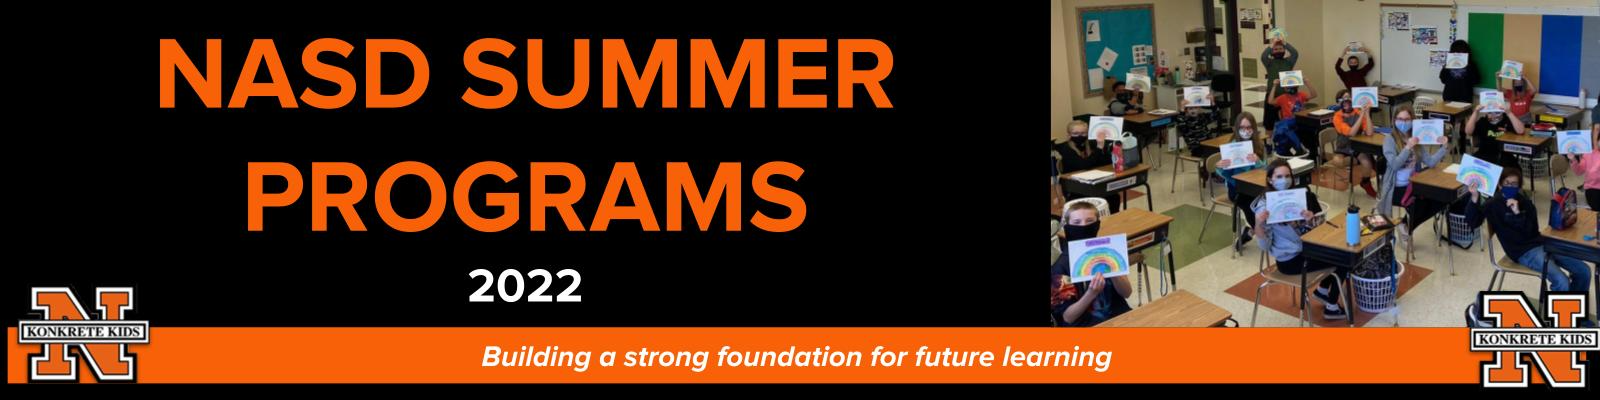 NASD Summer Programs 2022 Building a strong foundation for future learning